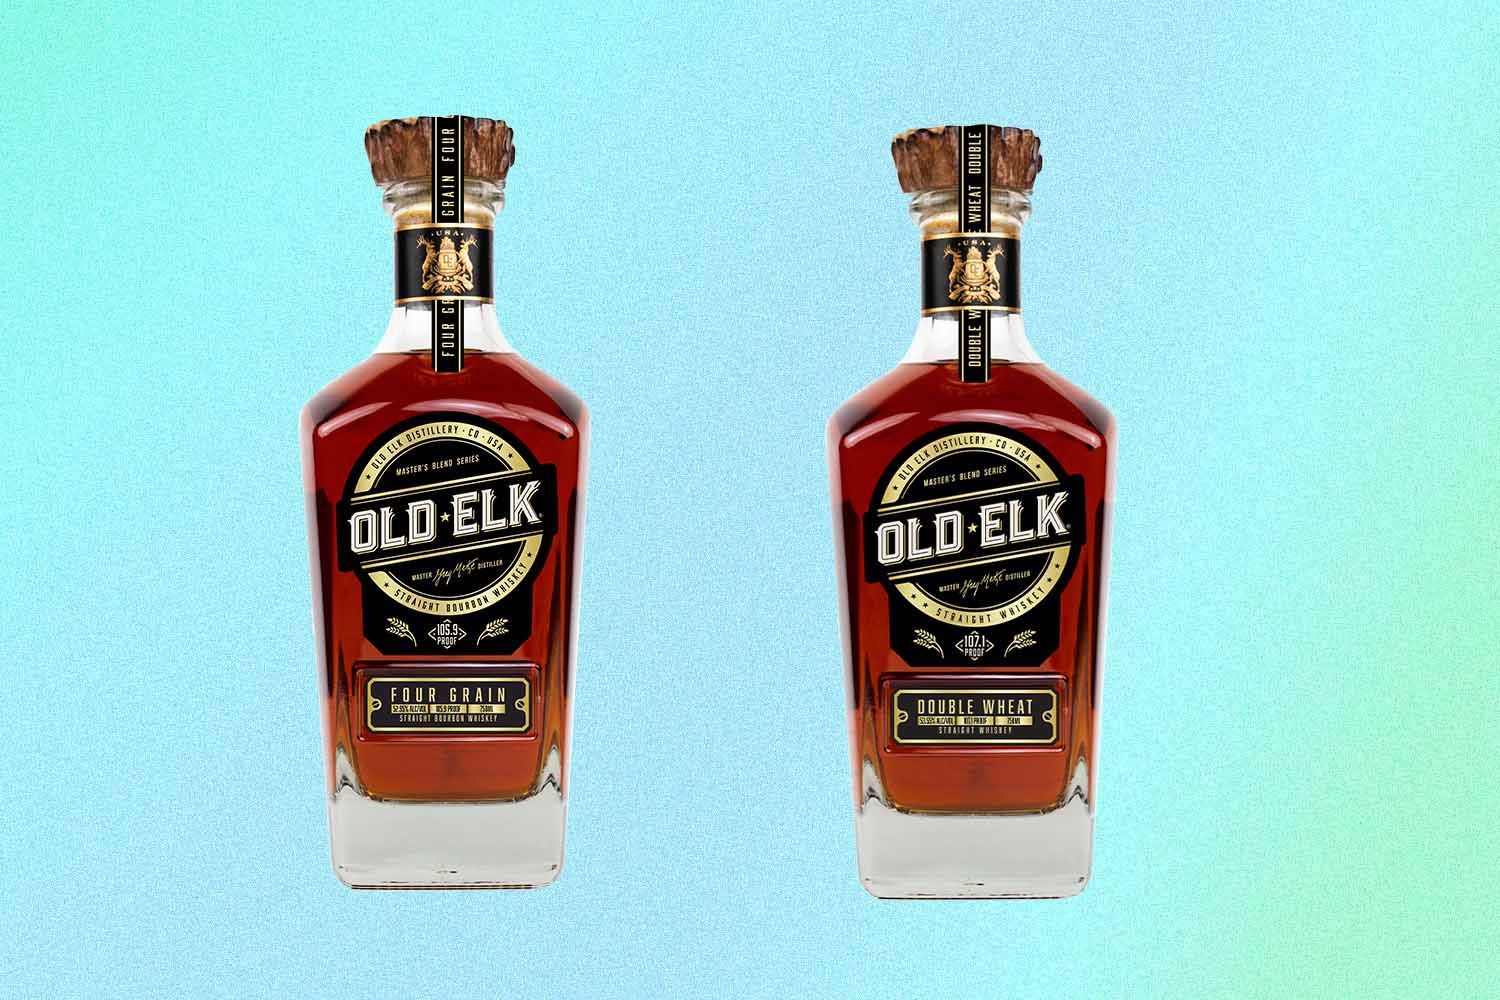 Old Elk Four Grain and Double Wheat